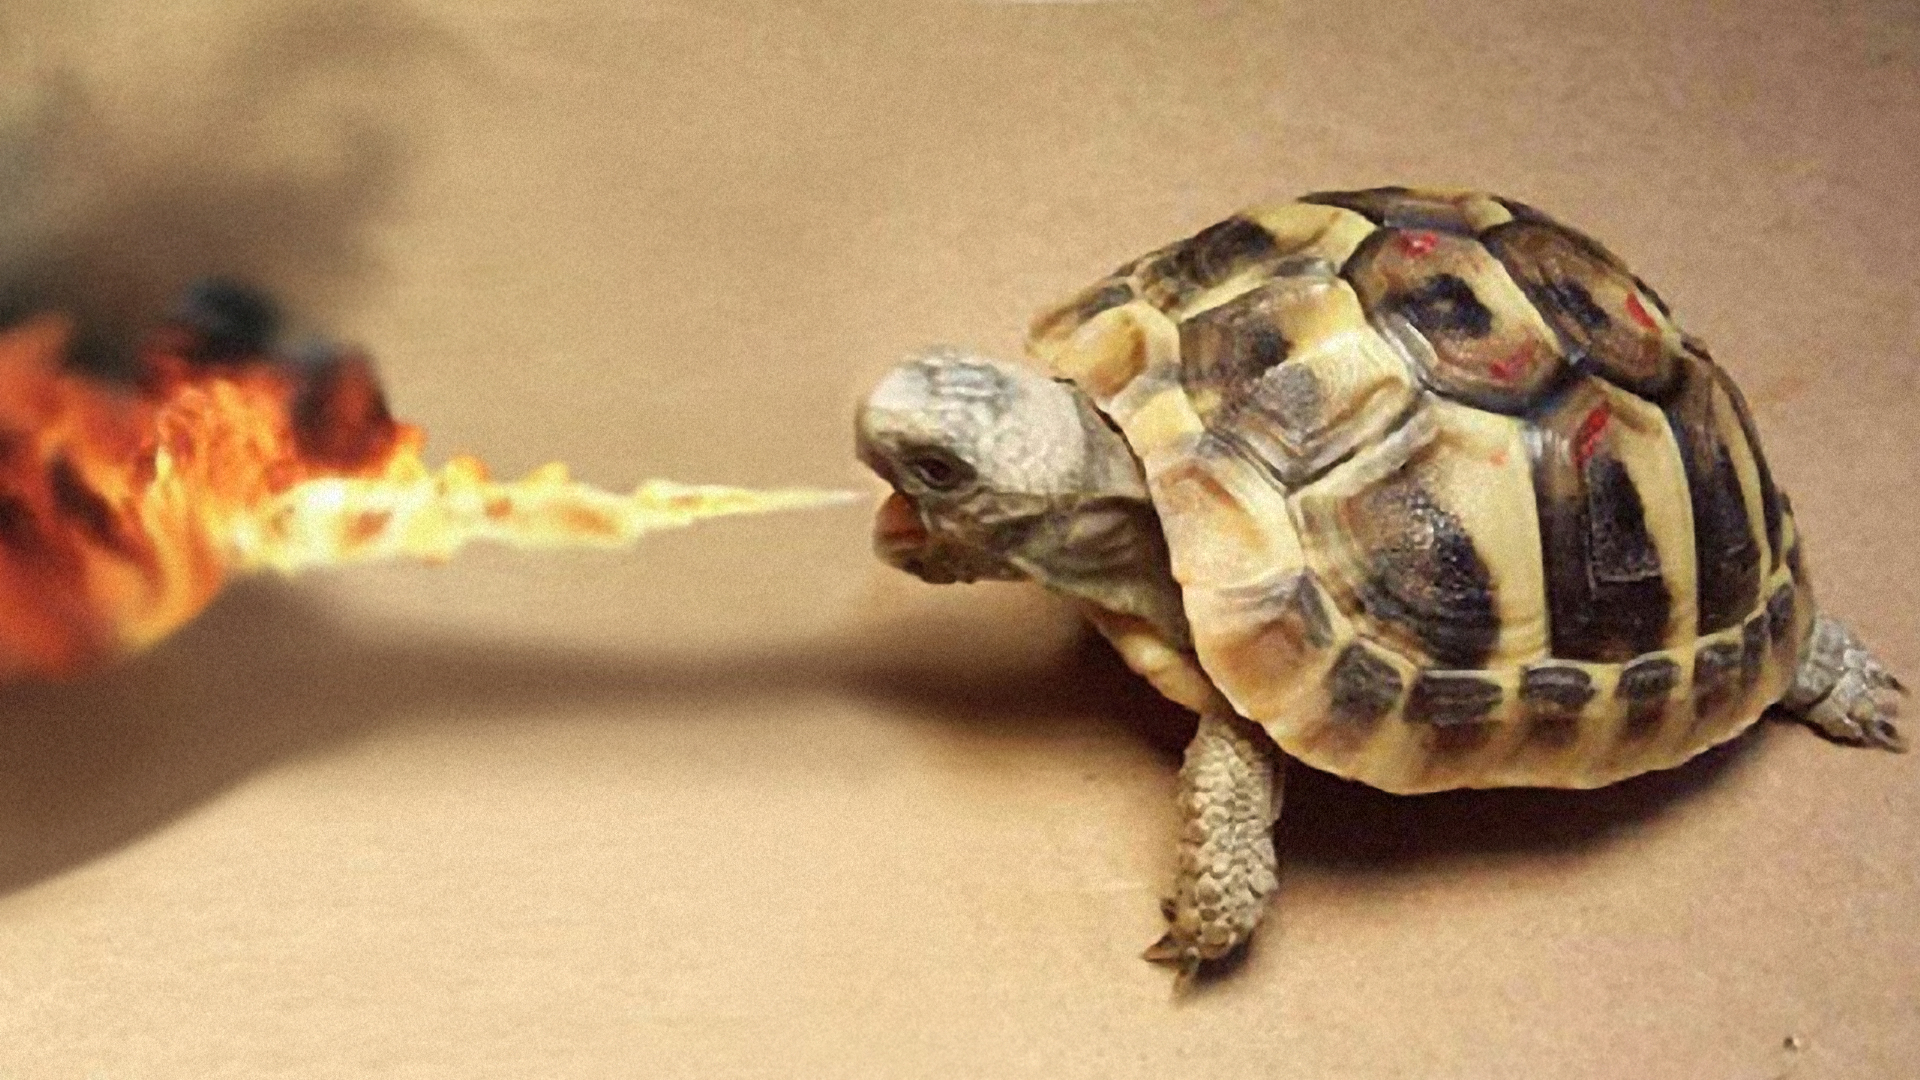 Wallpaper Turtle Breathing Fire Reptile Image